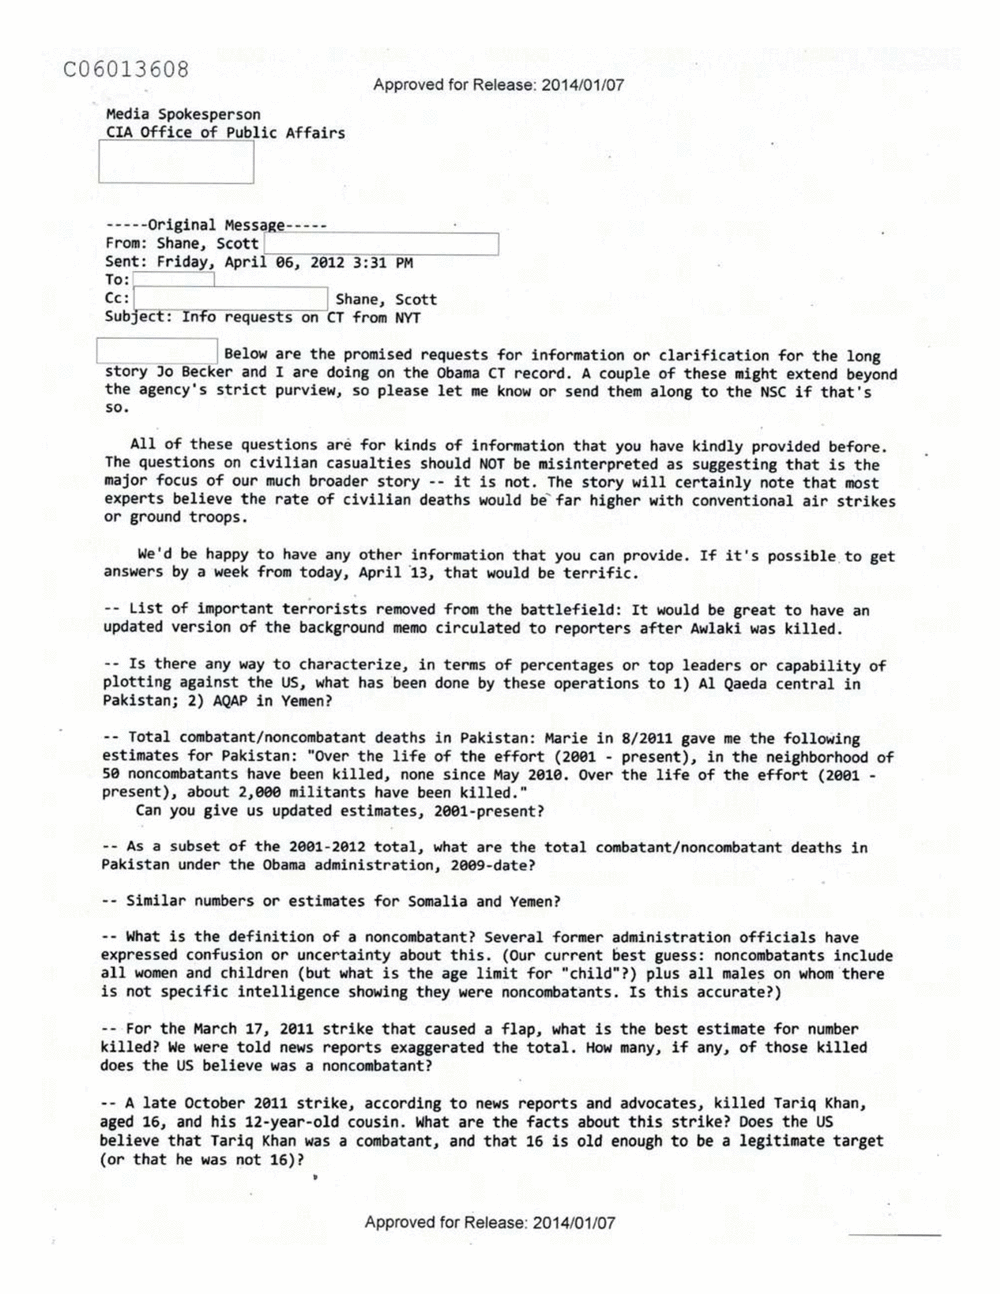 Page 421 from Email Correspondence Between Reporters and CIA Flacks